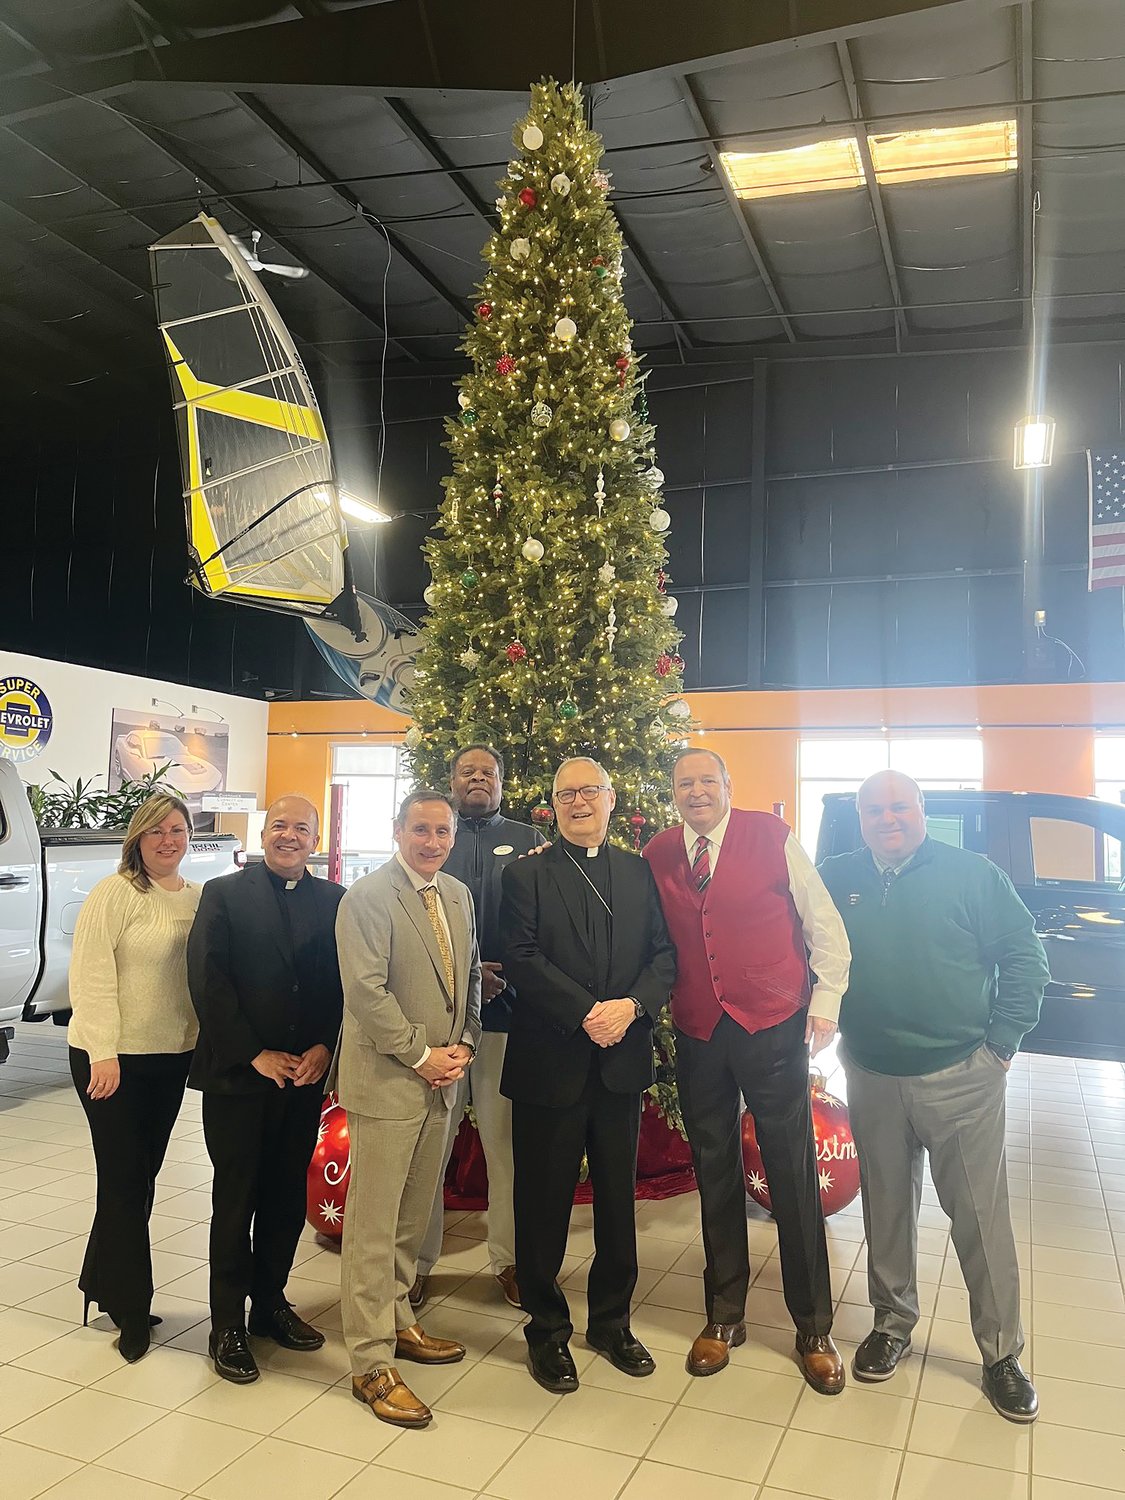 Bishop Thomas J. Tobin visits Paul Masse Chevrolet in East Providence on Dec. 6, to receive a generous donation from the Masse family and company to help ‘Keep the Heat On’ and to assist many other ministries in the Diocese of Providence through the Catholic Charity Appeal and the Diocesan Assistance Fund. Pictured from left, Office Manager Kelly Gaulin, Pastor of St. Thomas More Church Father Marcel Taillon, President Scott Wellington, BDC Representative Farris Maxwell, Bishop Thomas J. Tobin, Founder and Chairman Paul Masse, and Vice President Bob Masse.